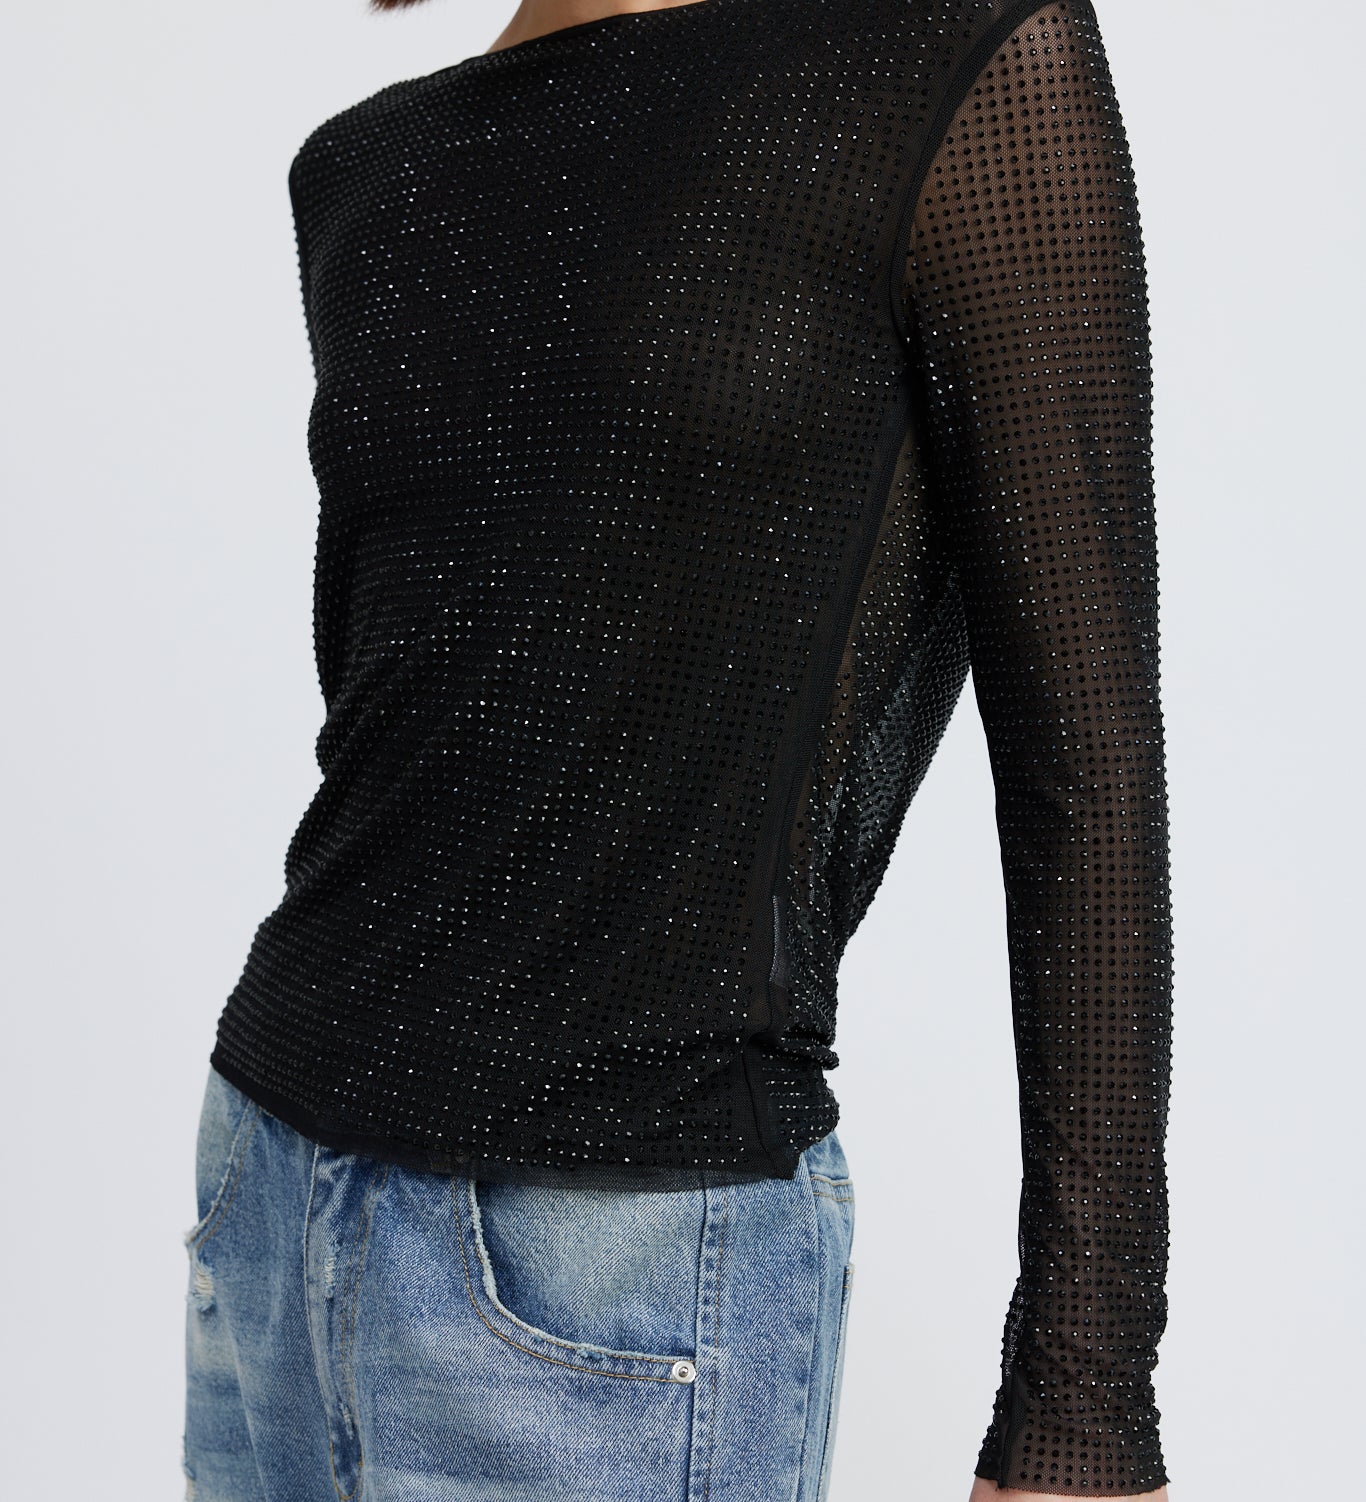 A model wearing a black rhinestone deep cowl neck backless top against a white wall. 